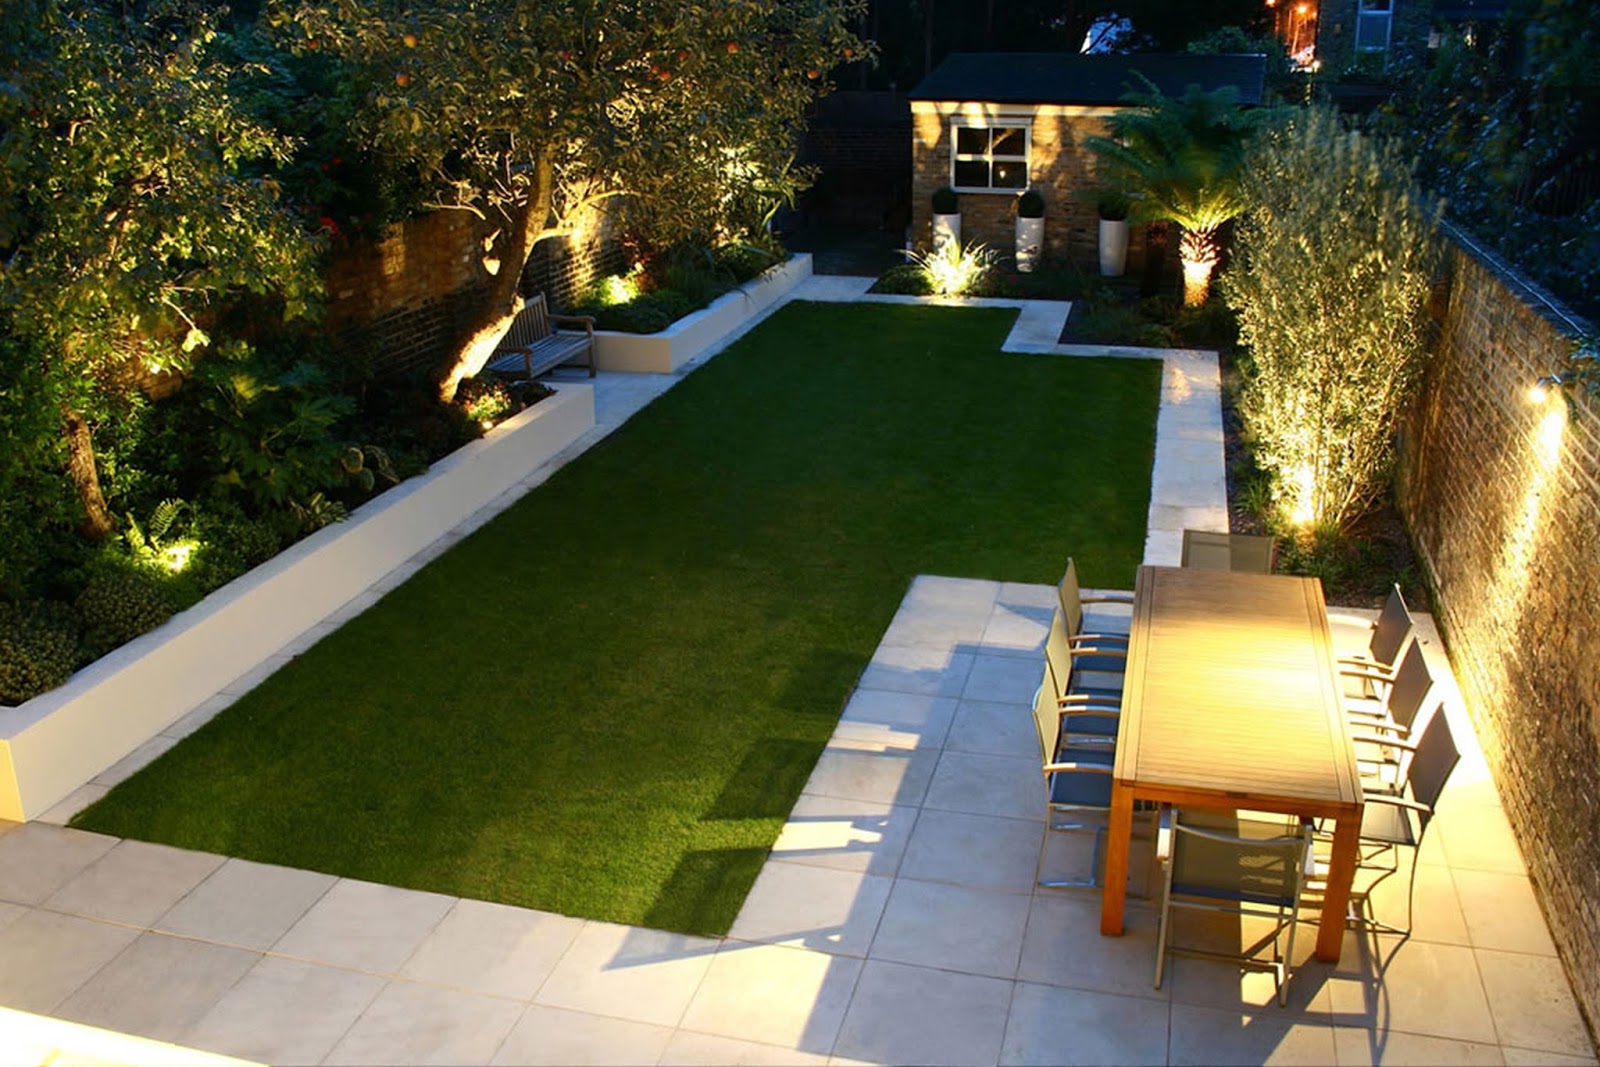 Exquisite-Modern-Garden-Design-with-Beautiful-Lightings-Endearing